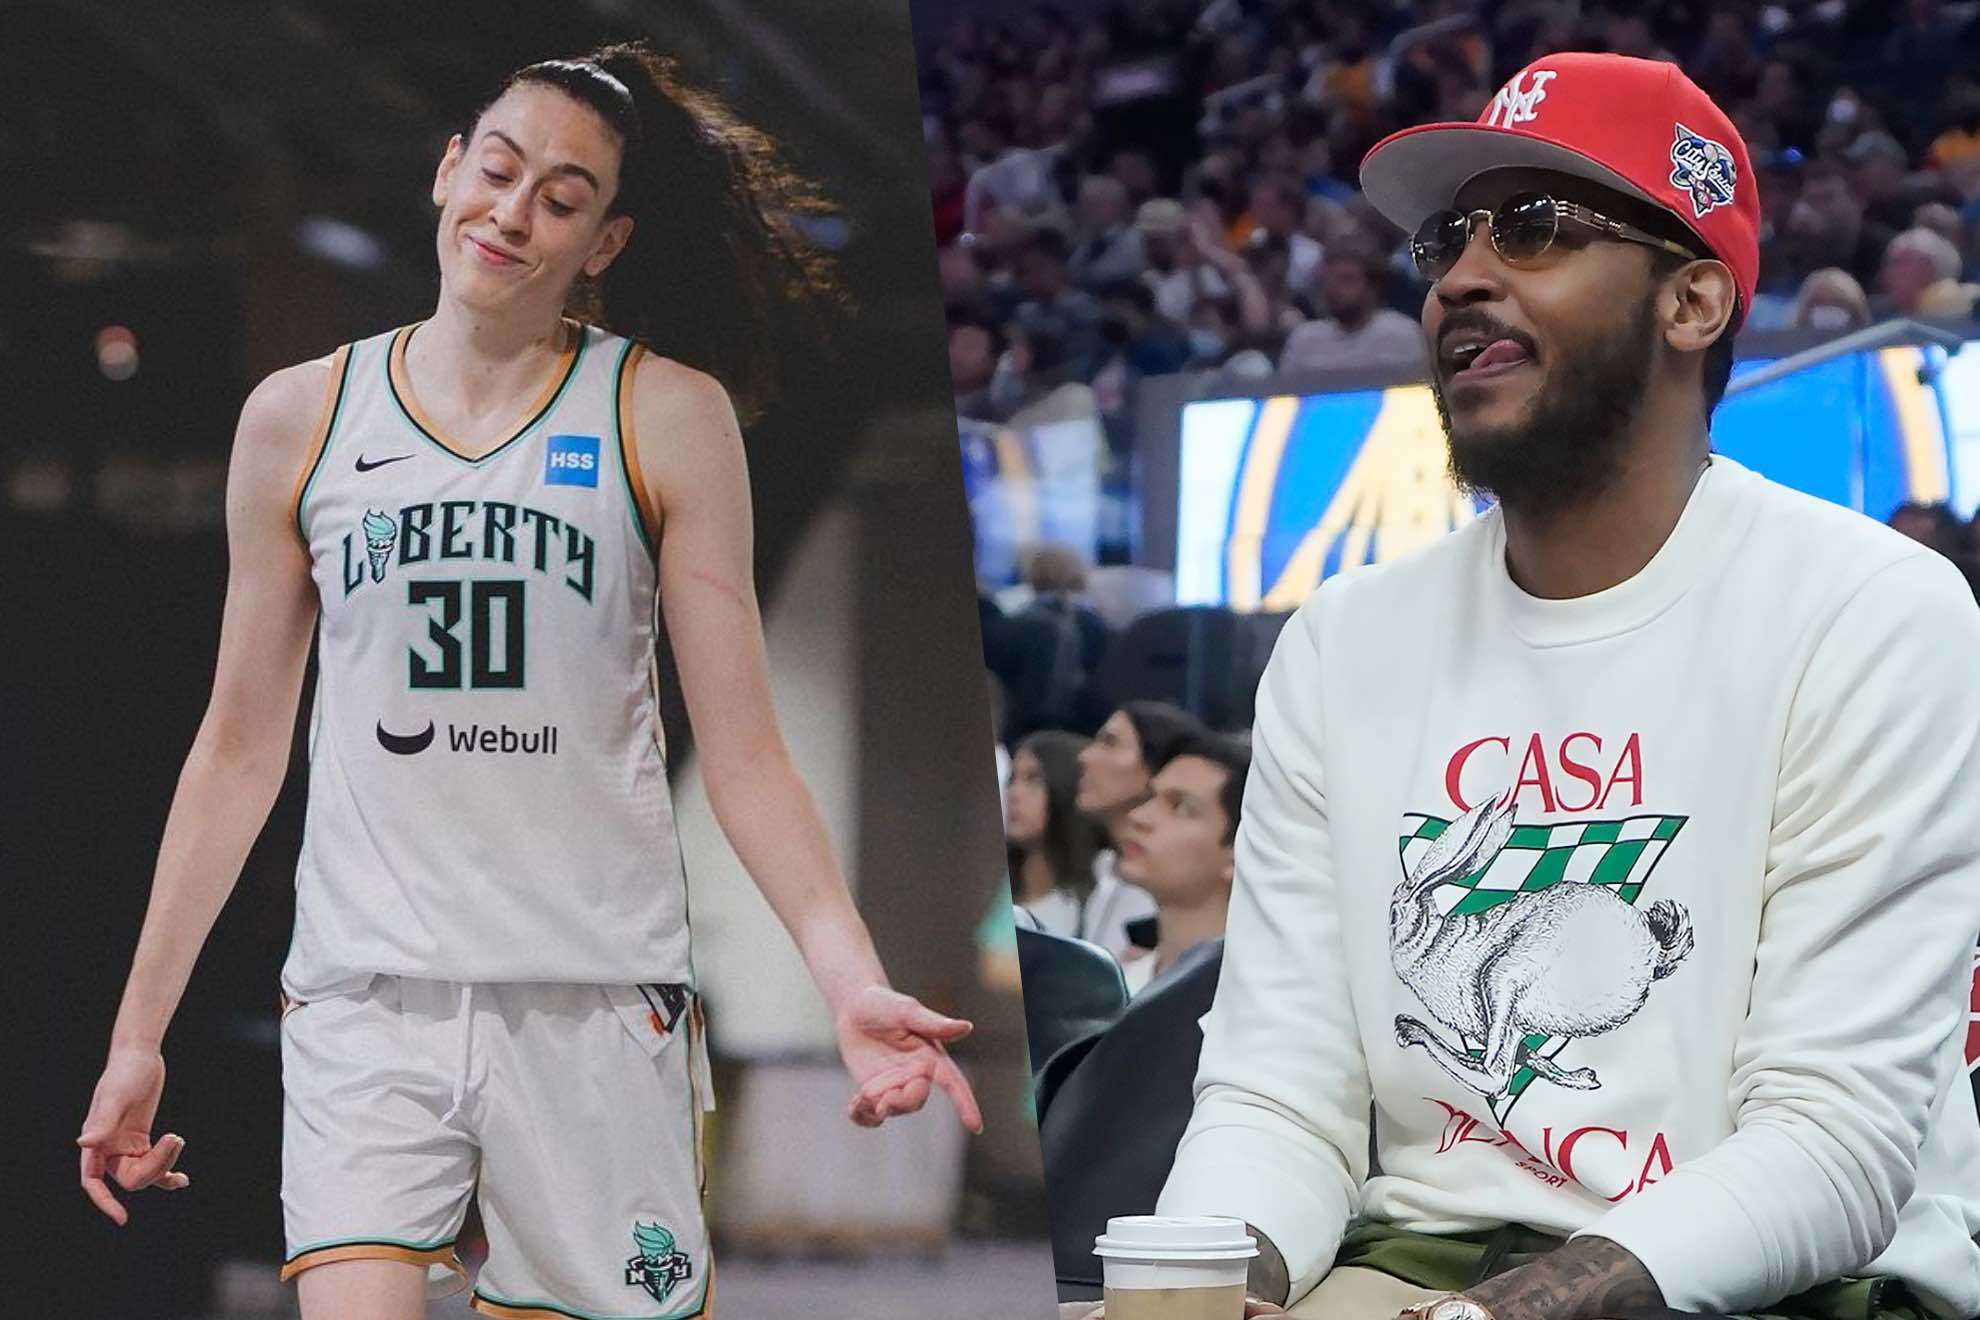 Breanna Stewart and Carmelo Anthony met after a WNBA playoff game